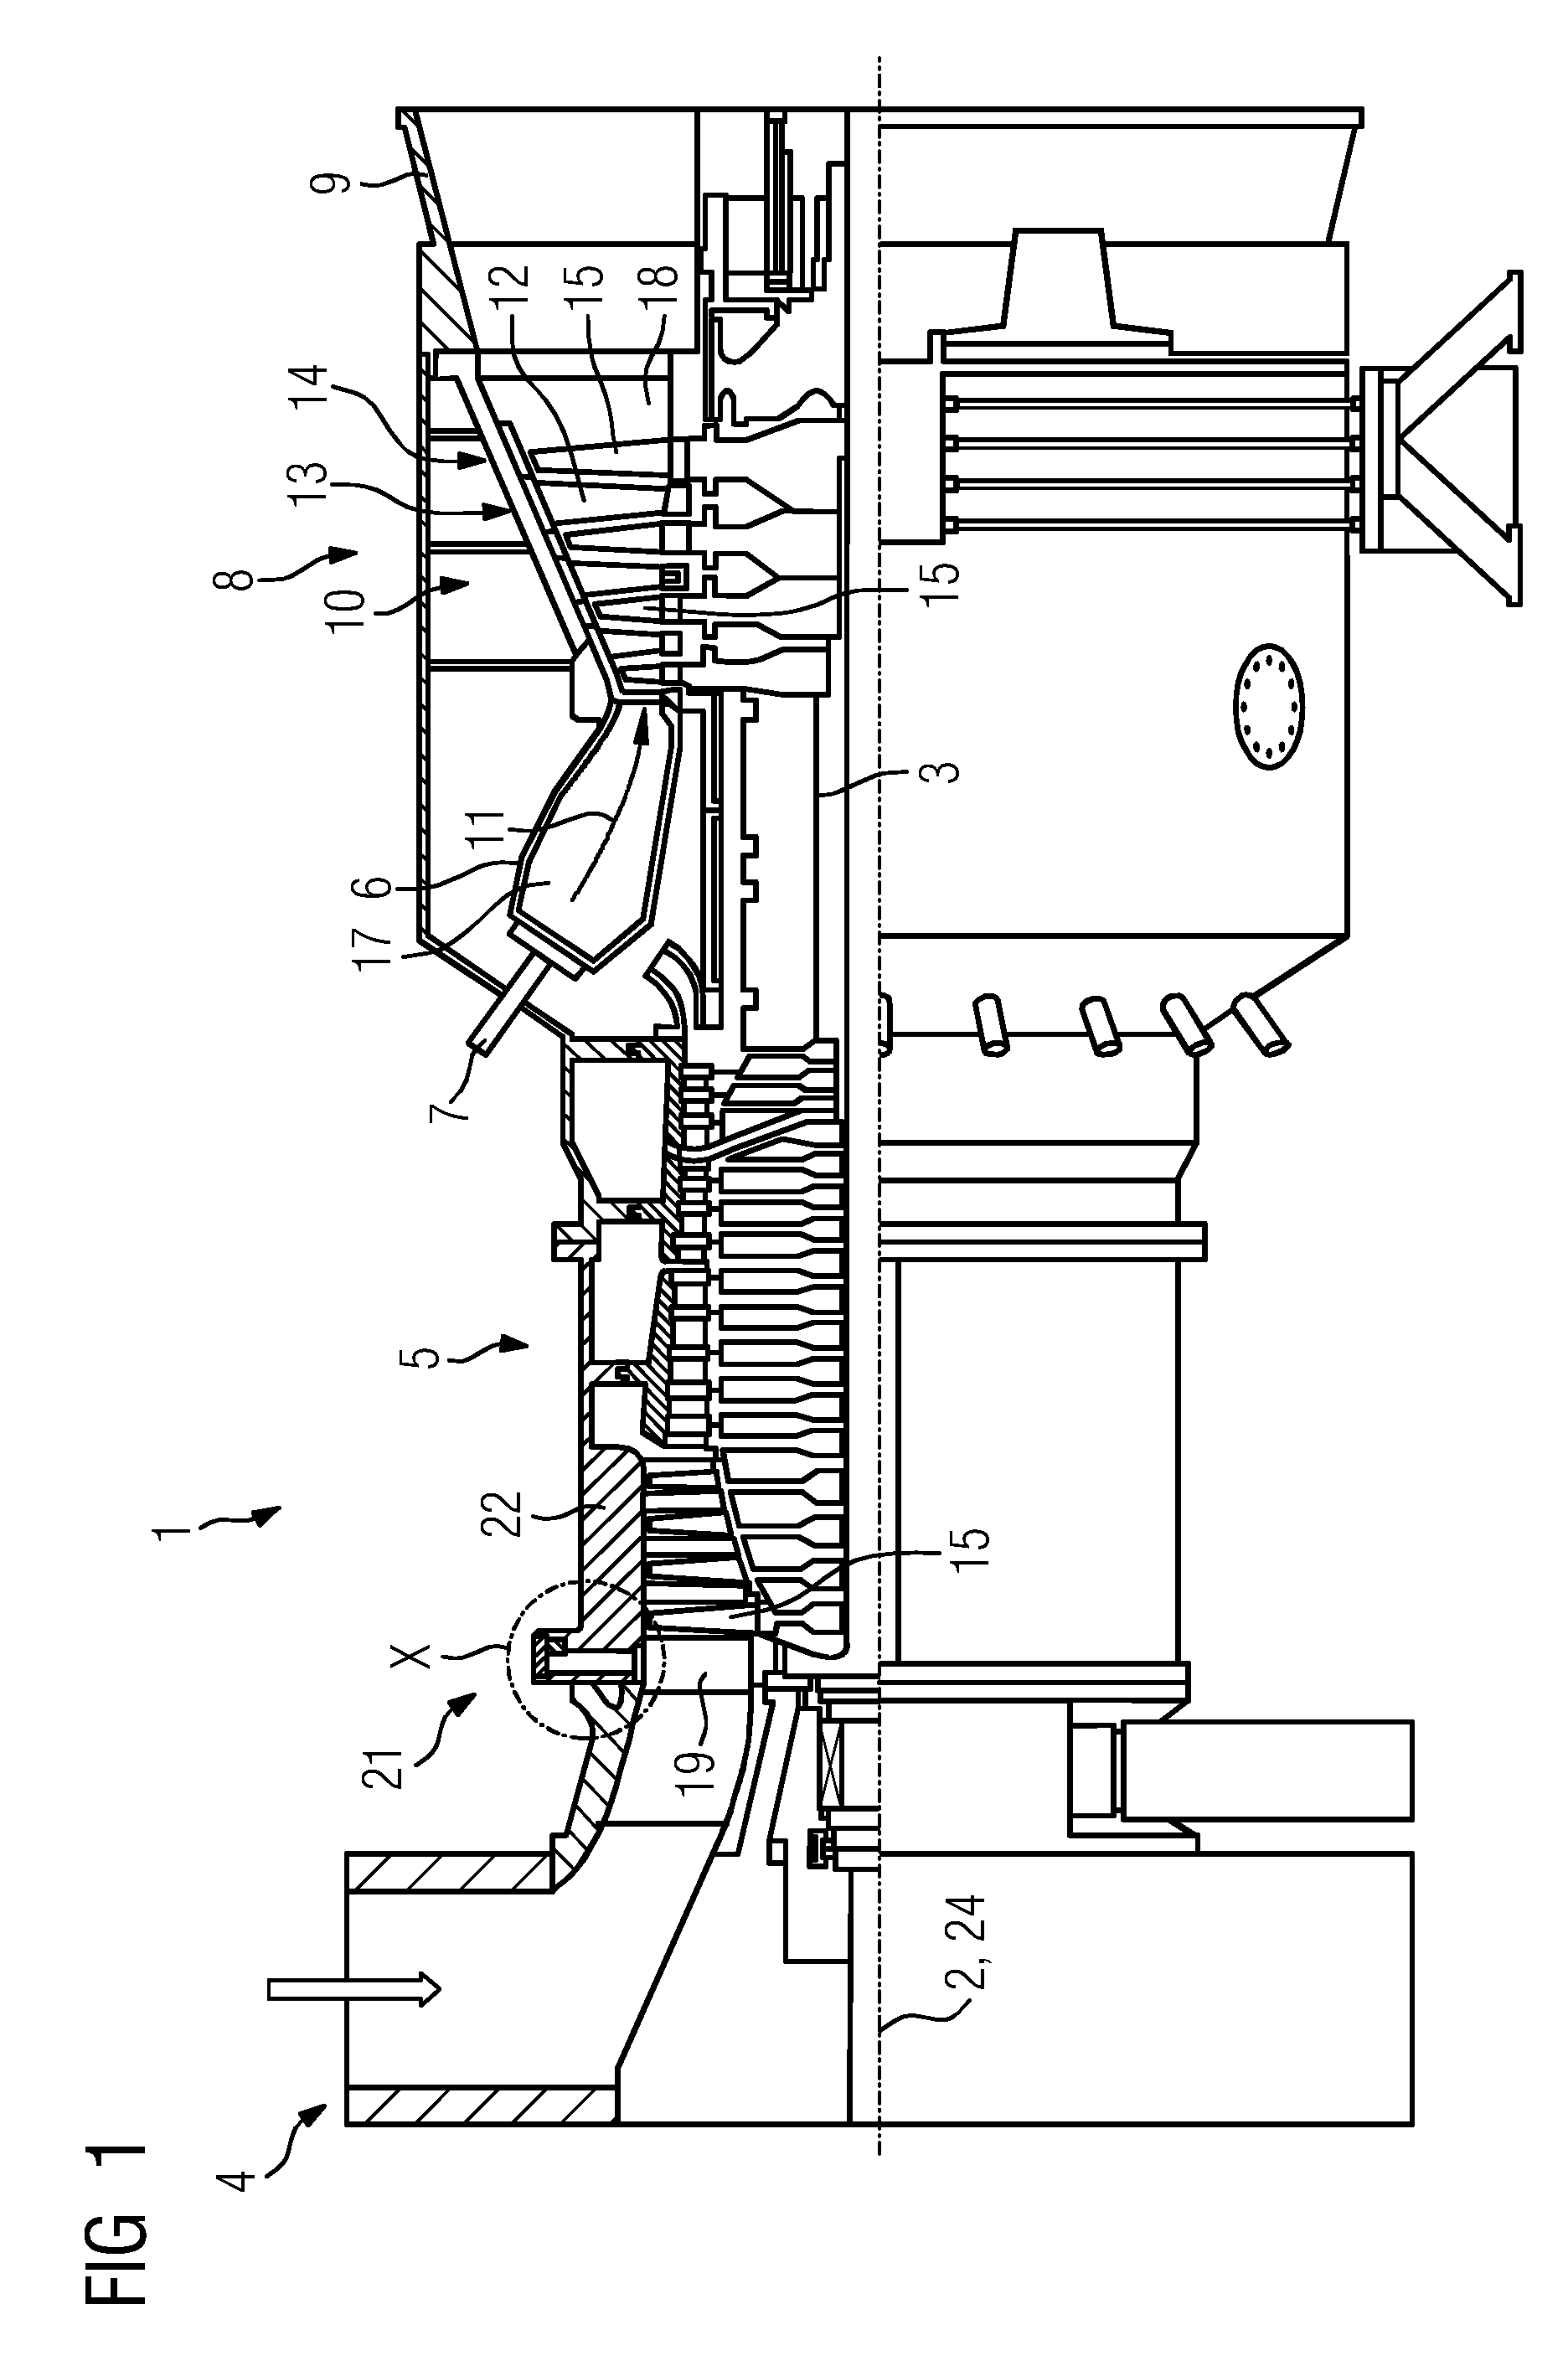 Drive device for pivoting adjustable blades of a turbomachine